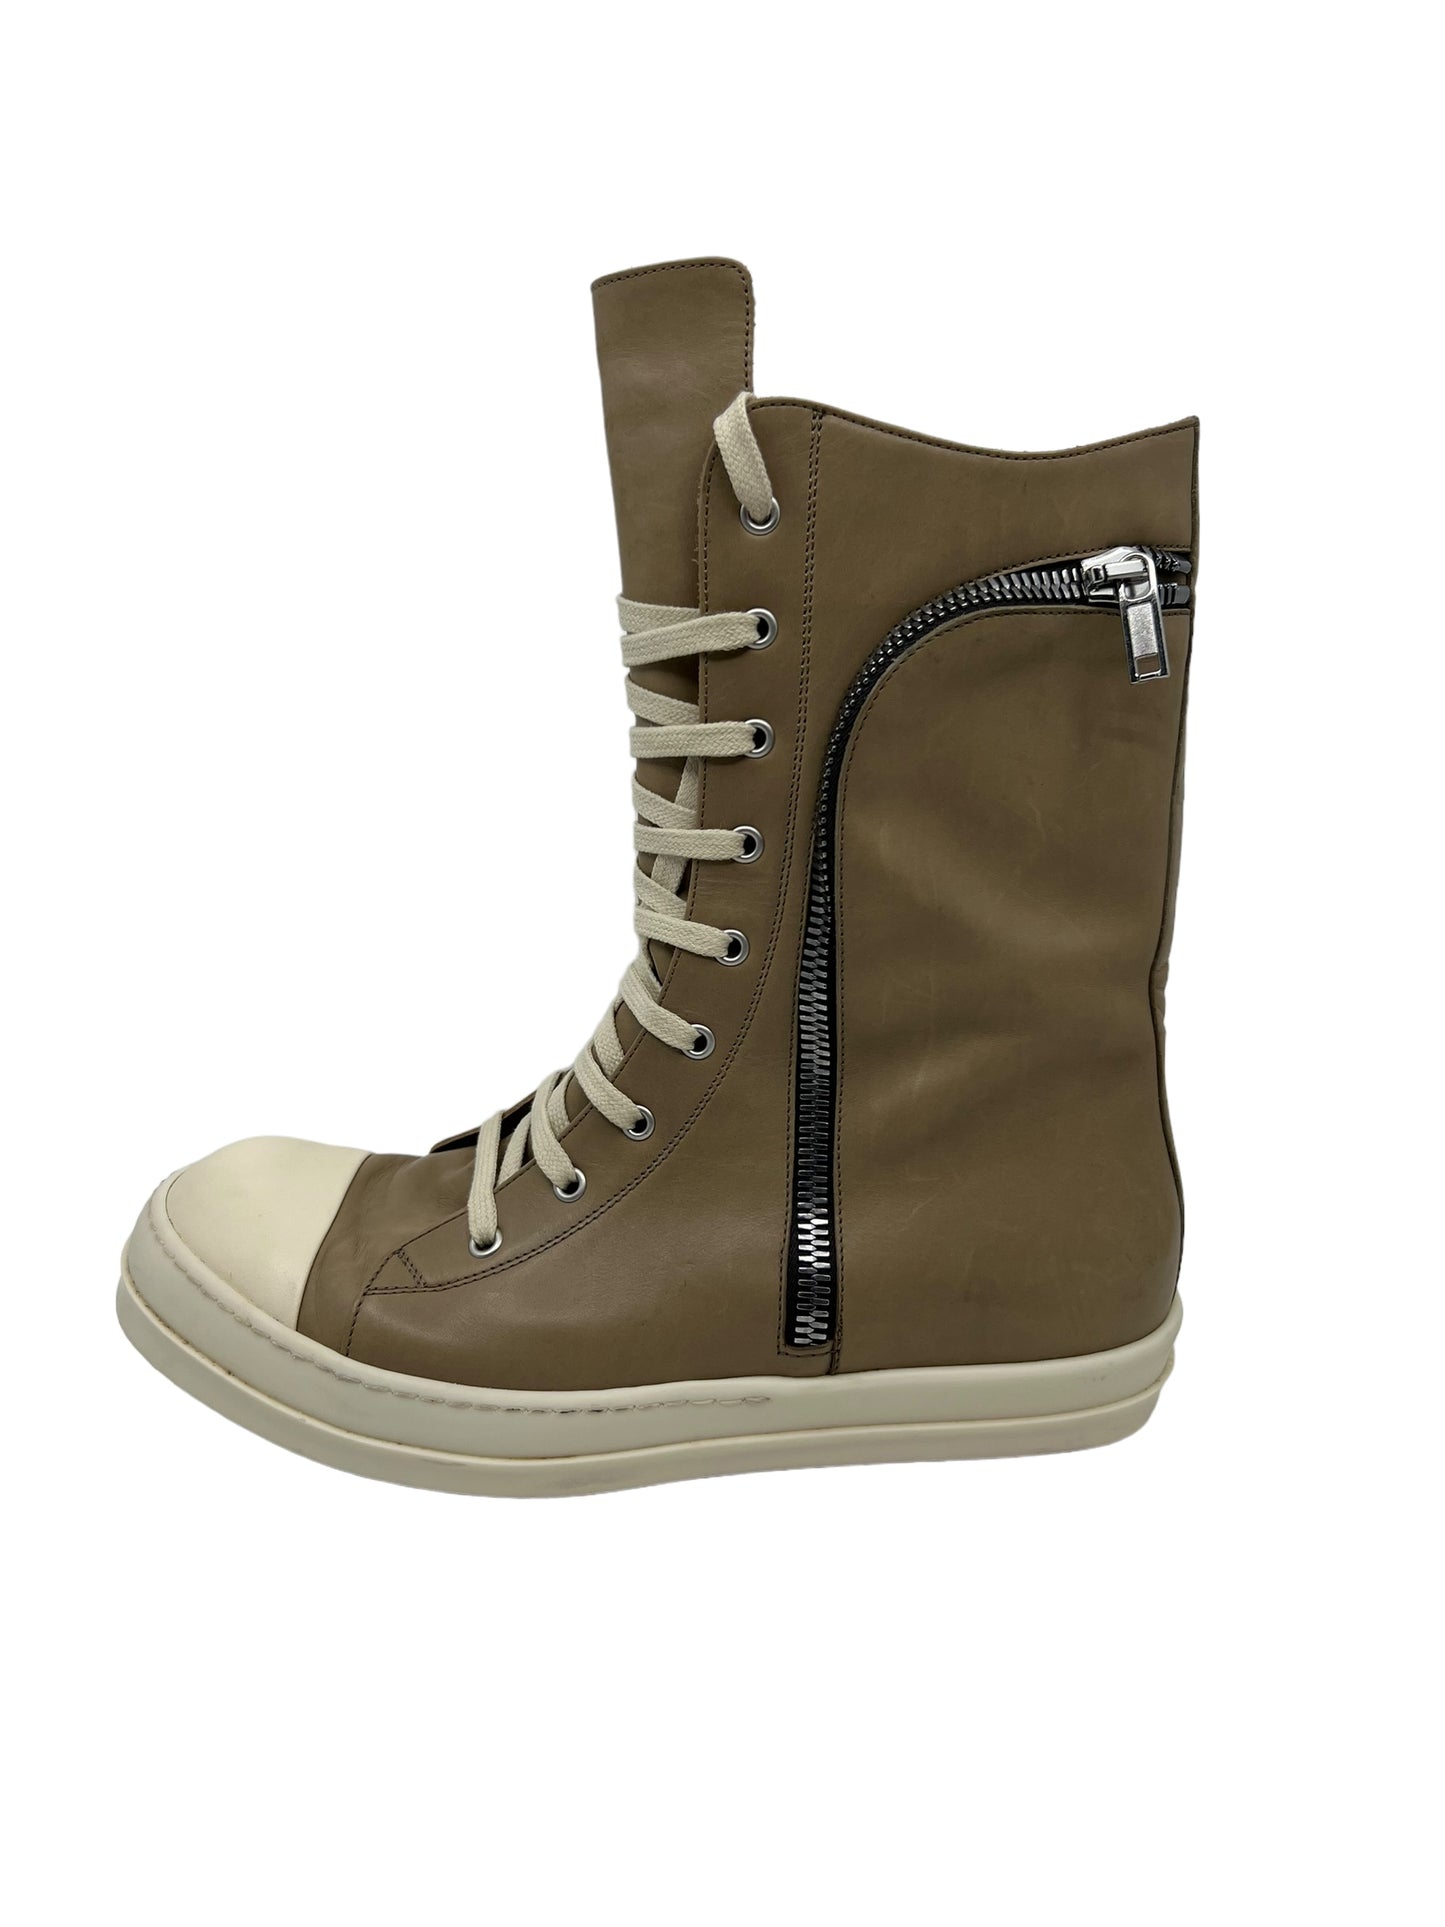 Rick Owens Cargo Basket Leather Hi-top pre-owned size 43